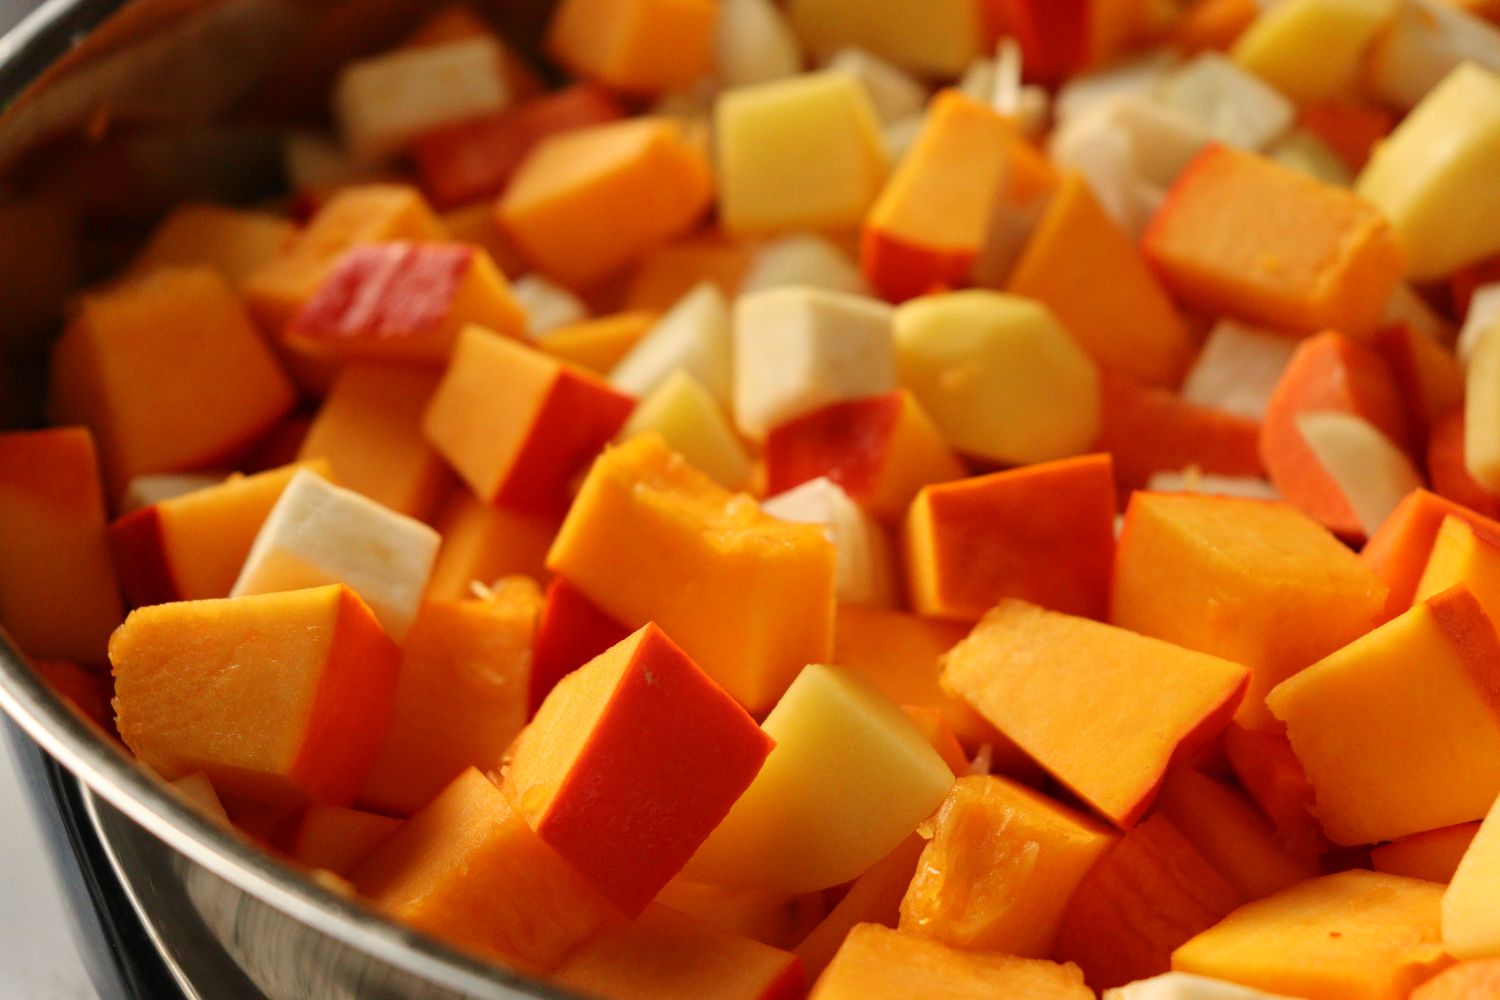 Cubed pumpkin, celery root, carrots, potatoes and onions for making pumpkin soup